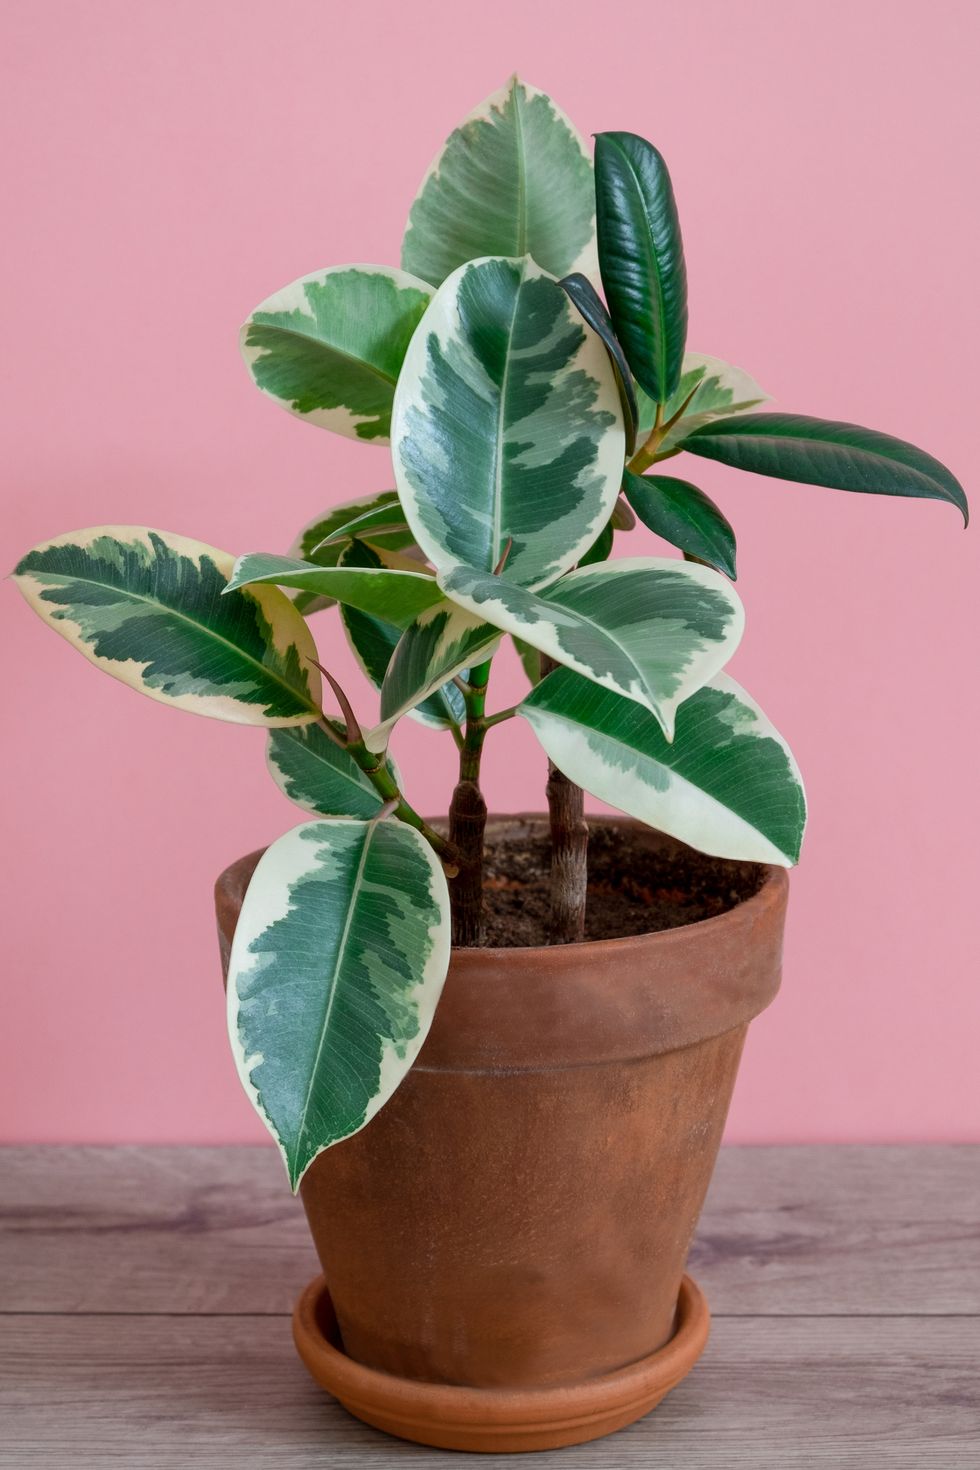 rubber ficus of the tieneke variety in a clay flower pot on a pink background